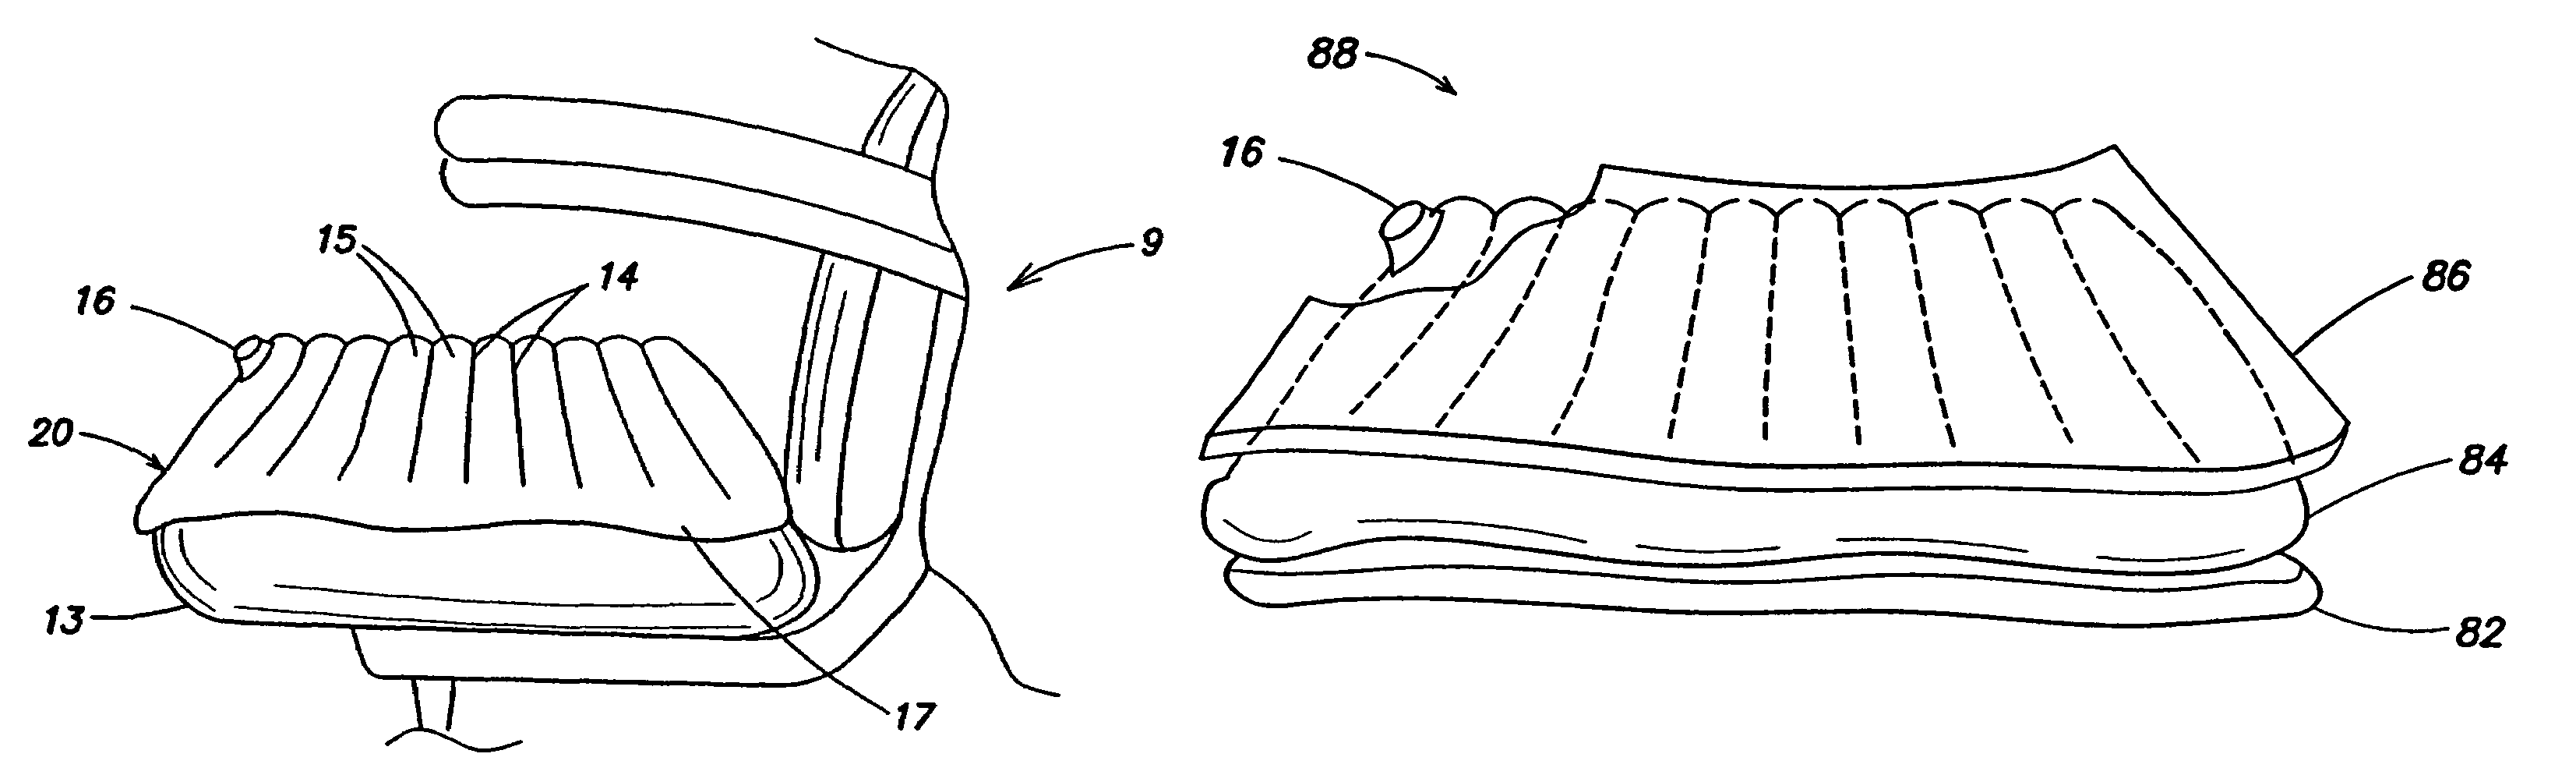 Body support, comfort device